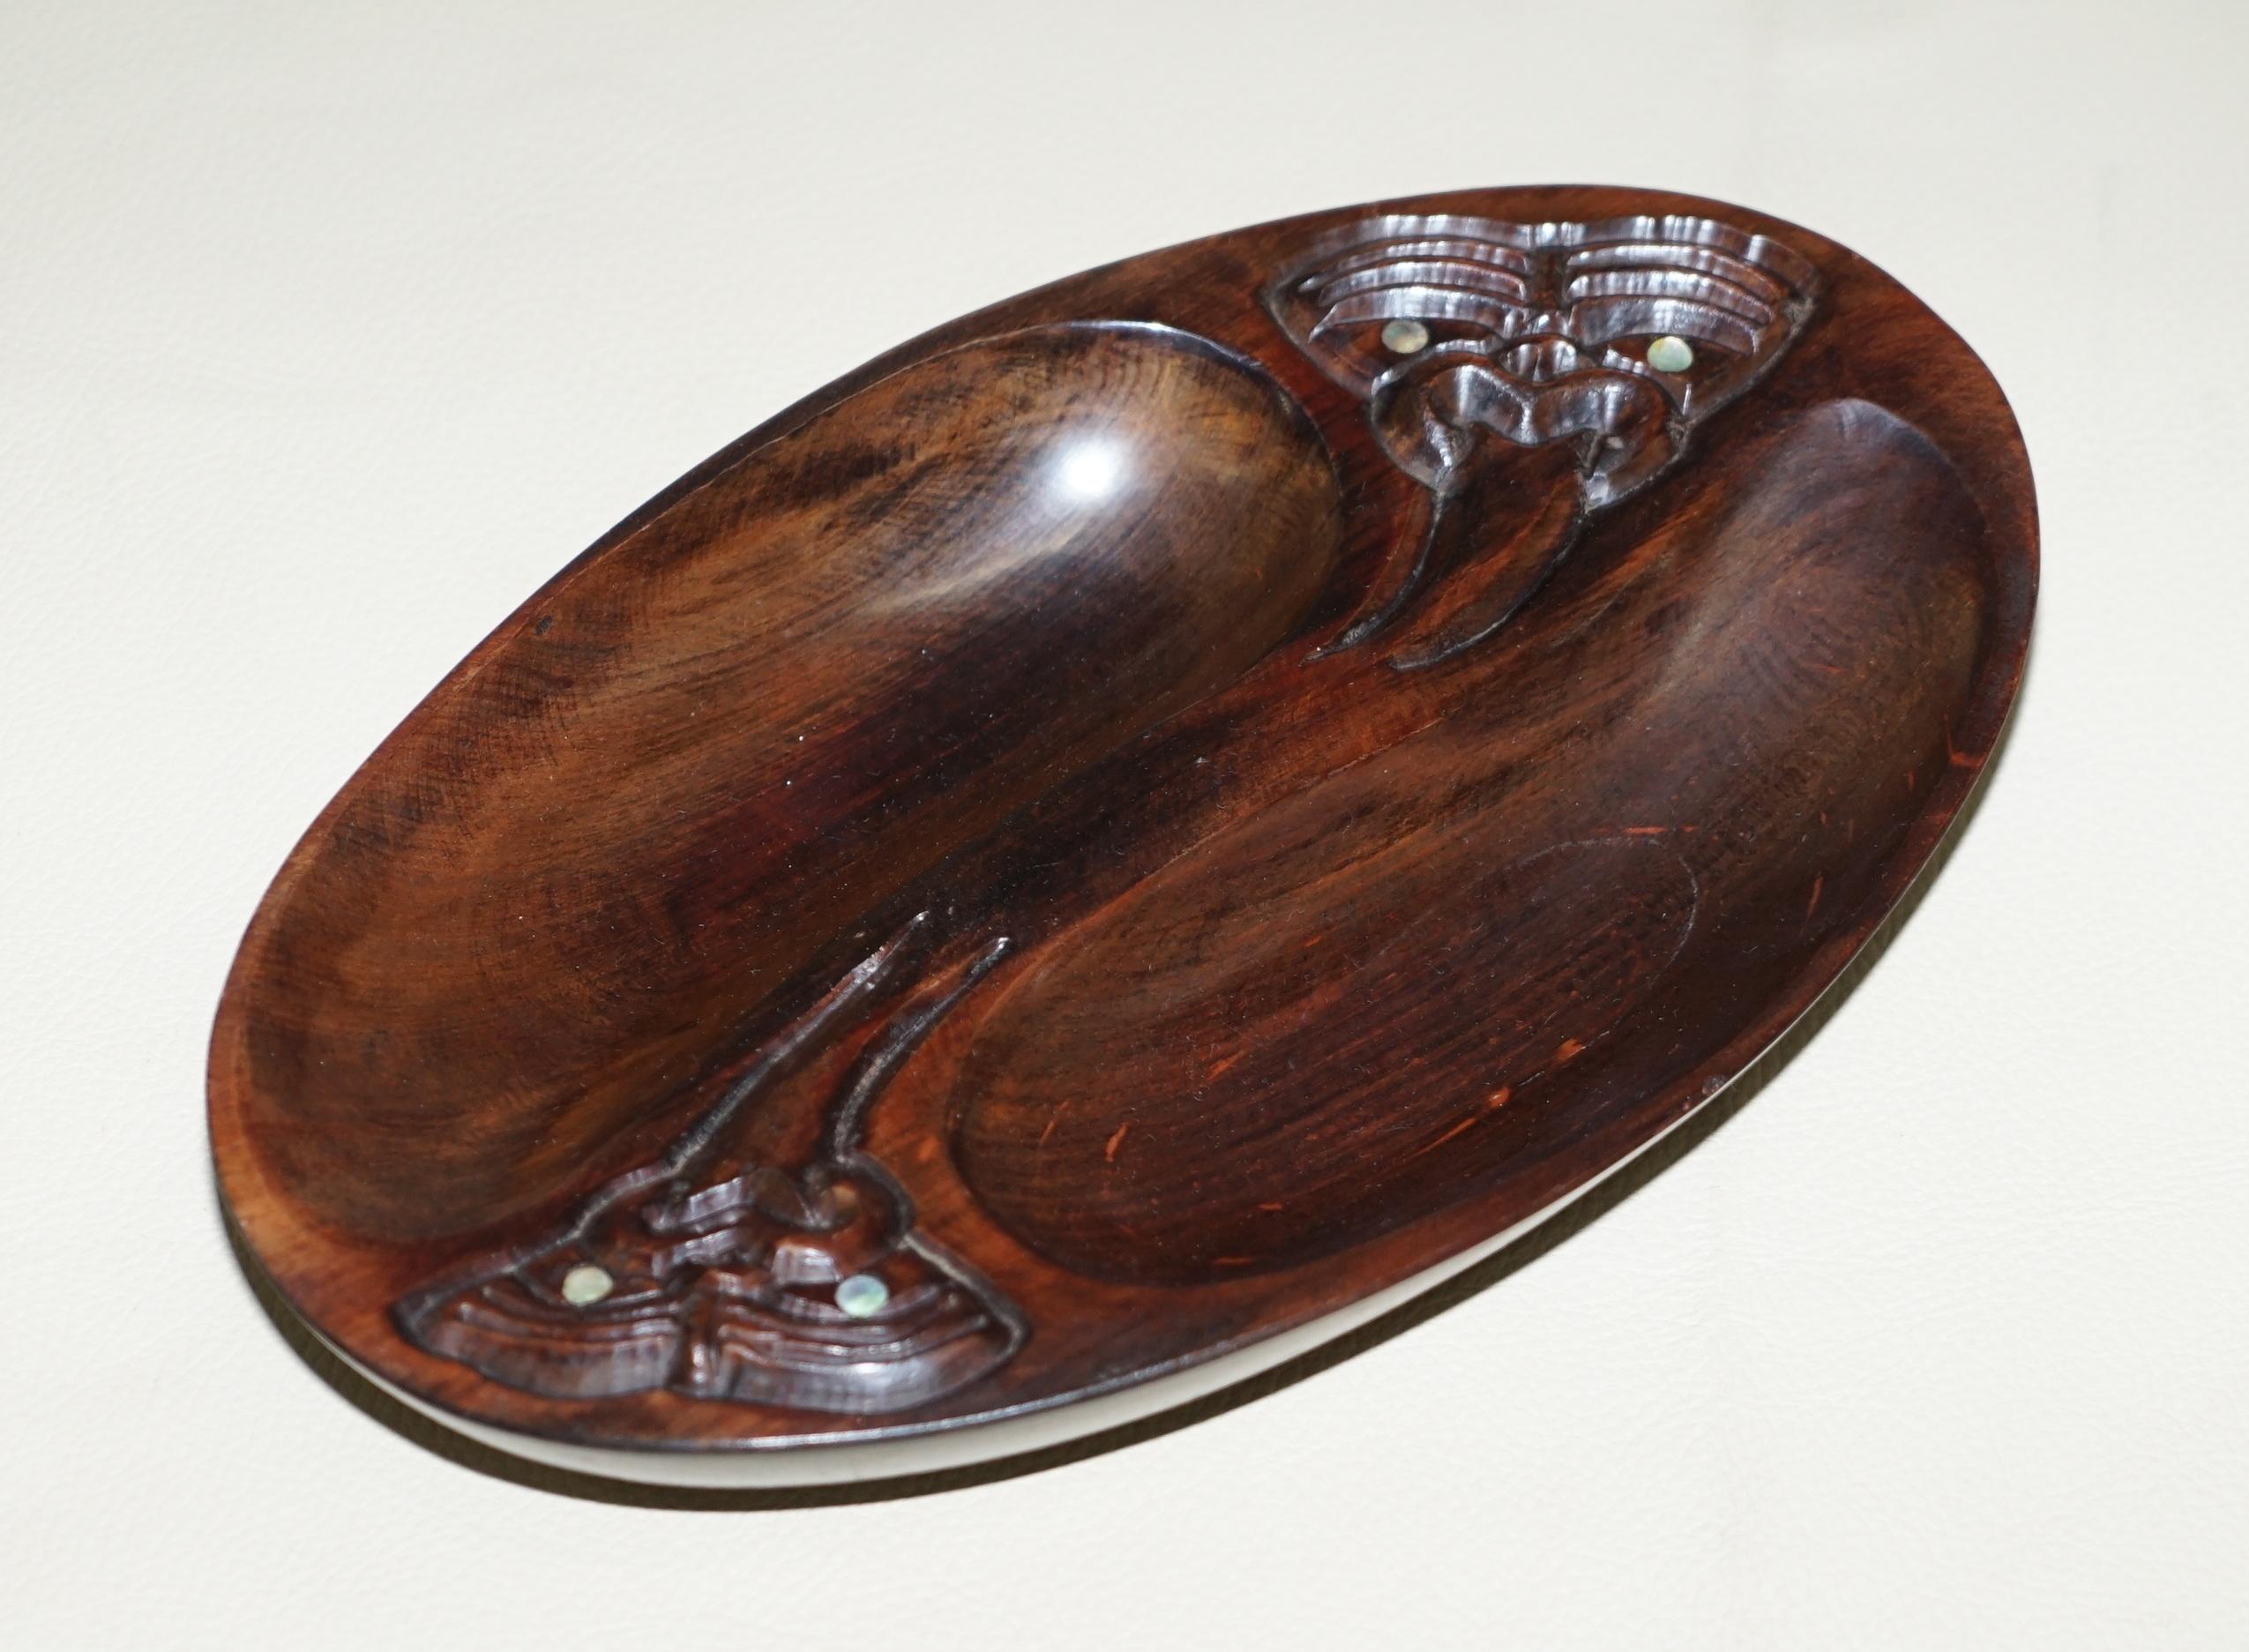 Wimbledon-Furniture

Wimbledon-Furniture is delighted to offer for sale this lovely decorative Arts & Crafts style hand made in New Zealand Wood Carved LTD trinket bowl with mother of pearl eyes

A good looking decorative and vintage bowl, ideally